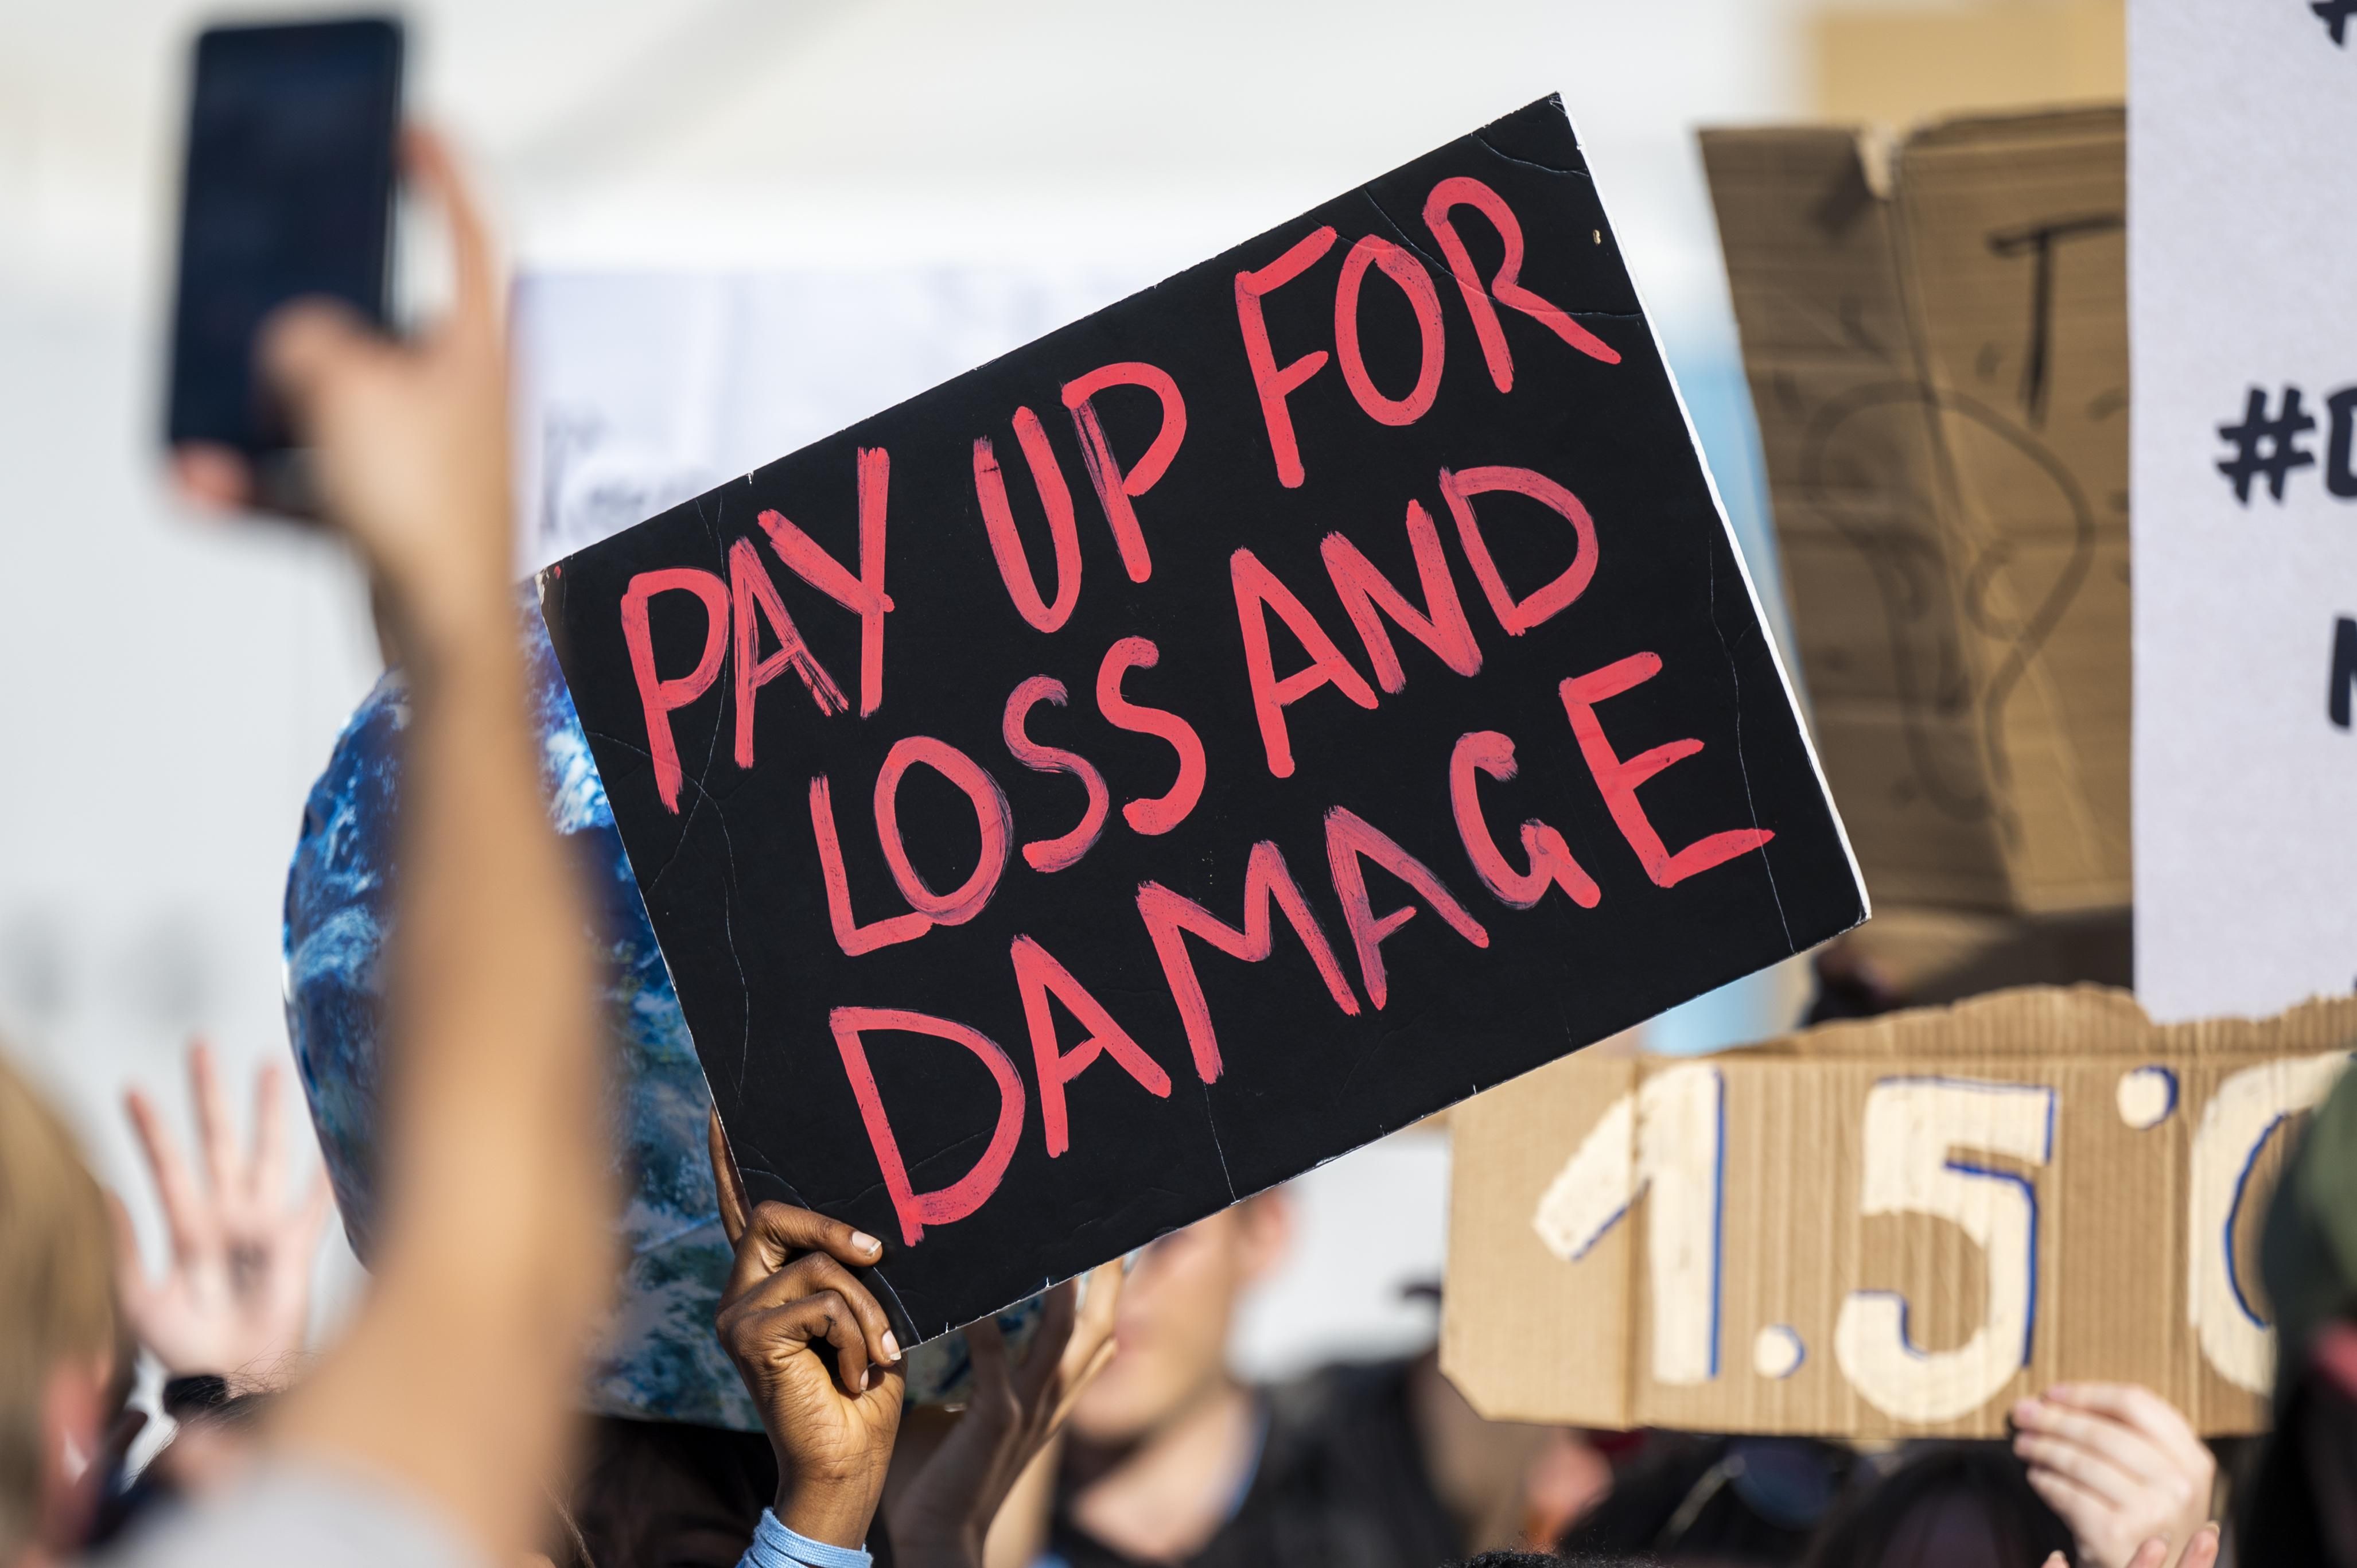 Sign reads "Pay Up for Loss and Damage"